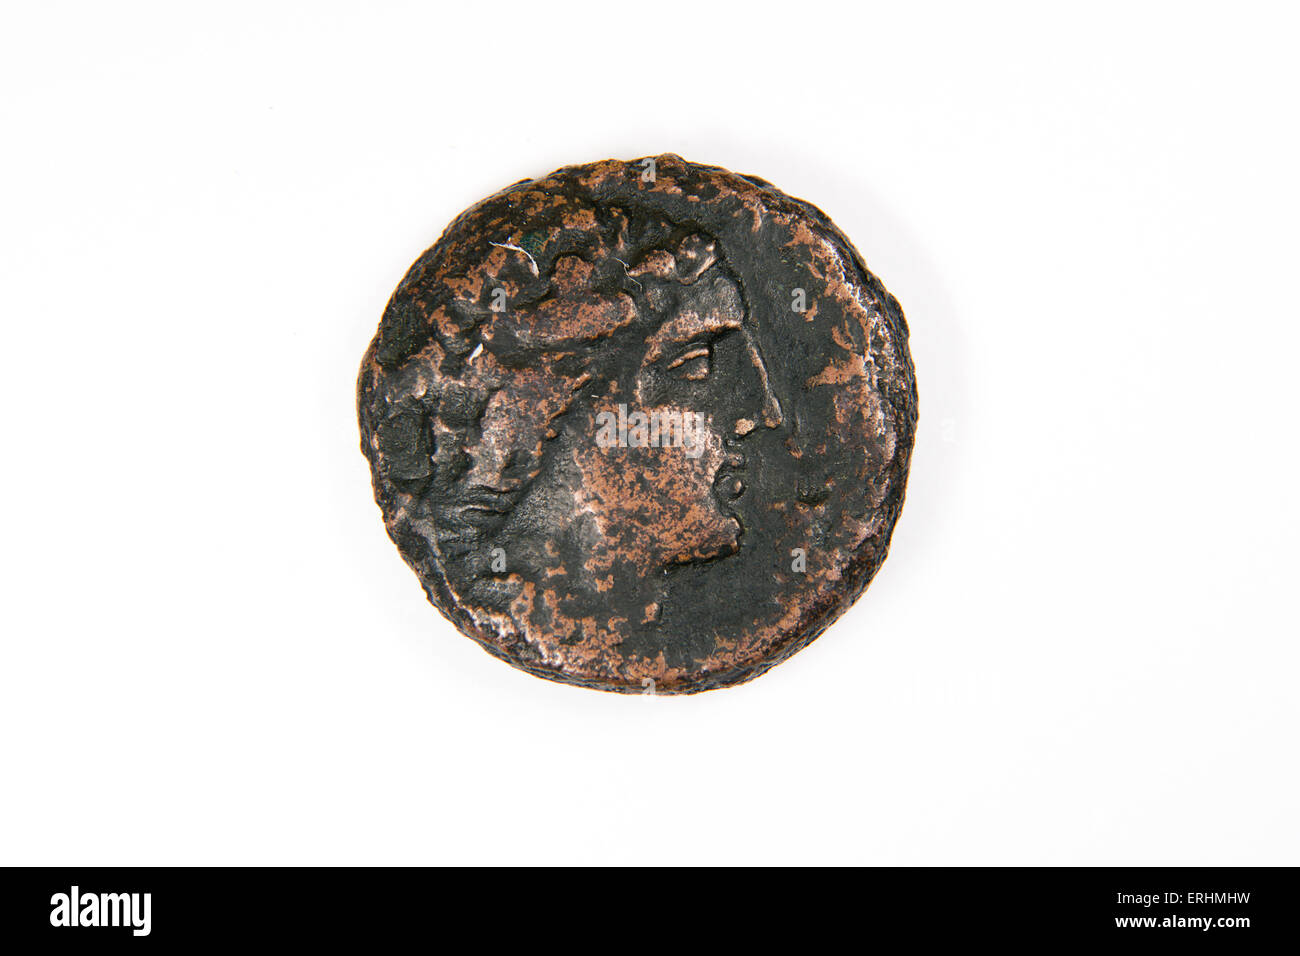 Old bronze coin with portrait on a white background Stock Photo